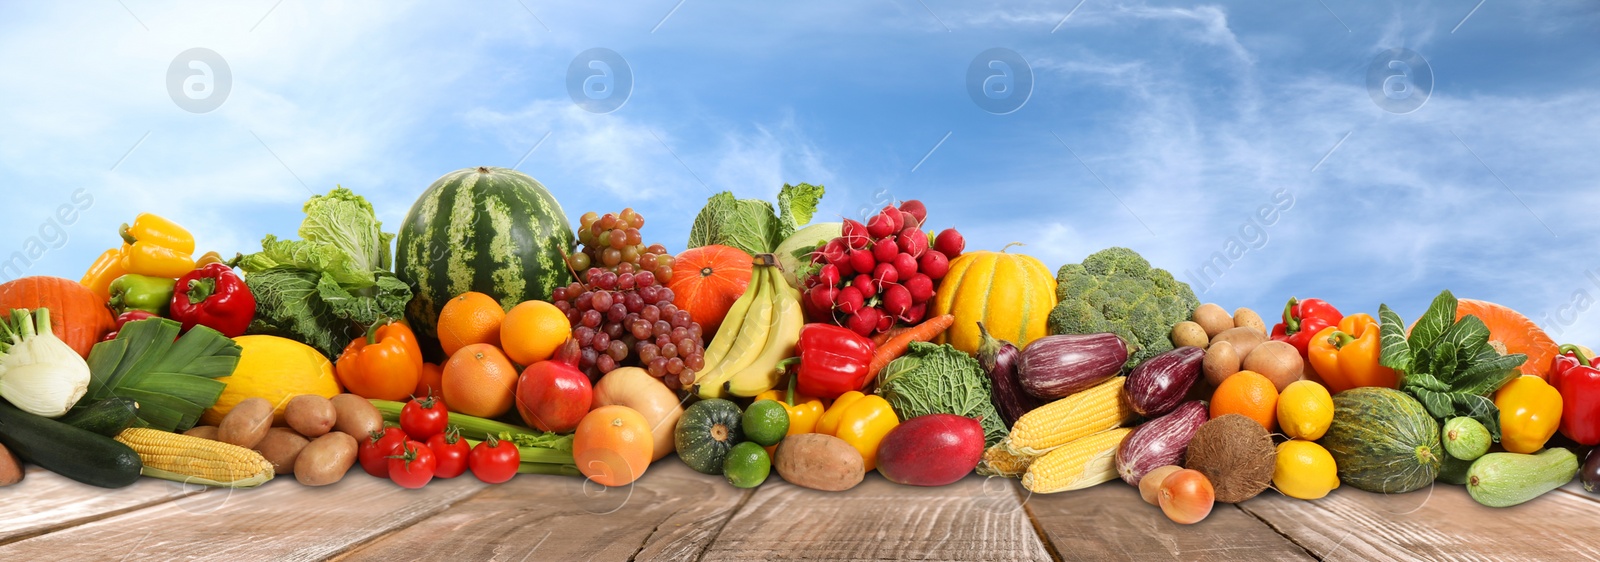 Image of Assortment of fresh organic fruits and vegetables on wooden table outdoors. Banner design